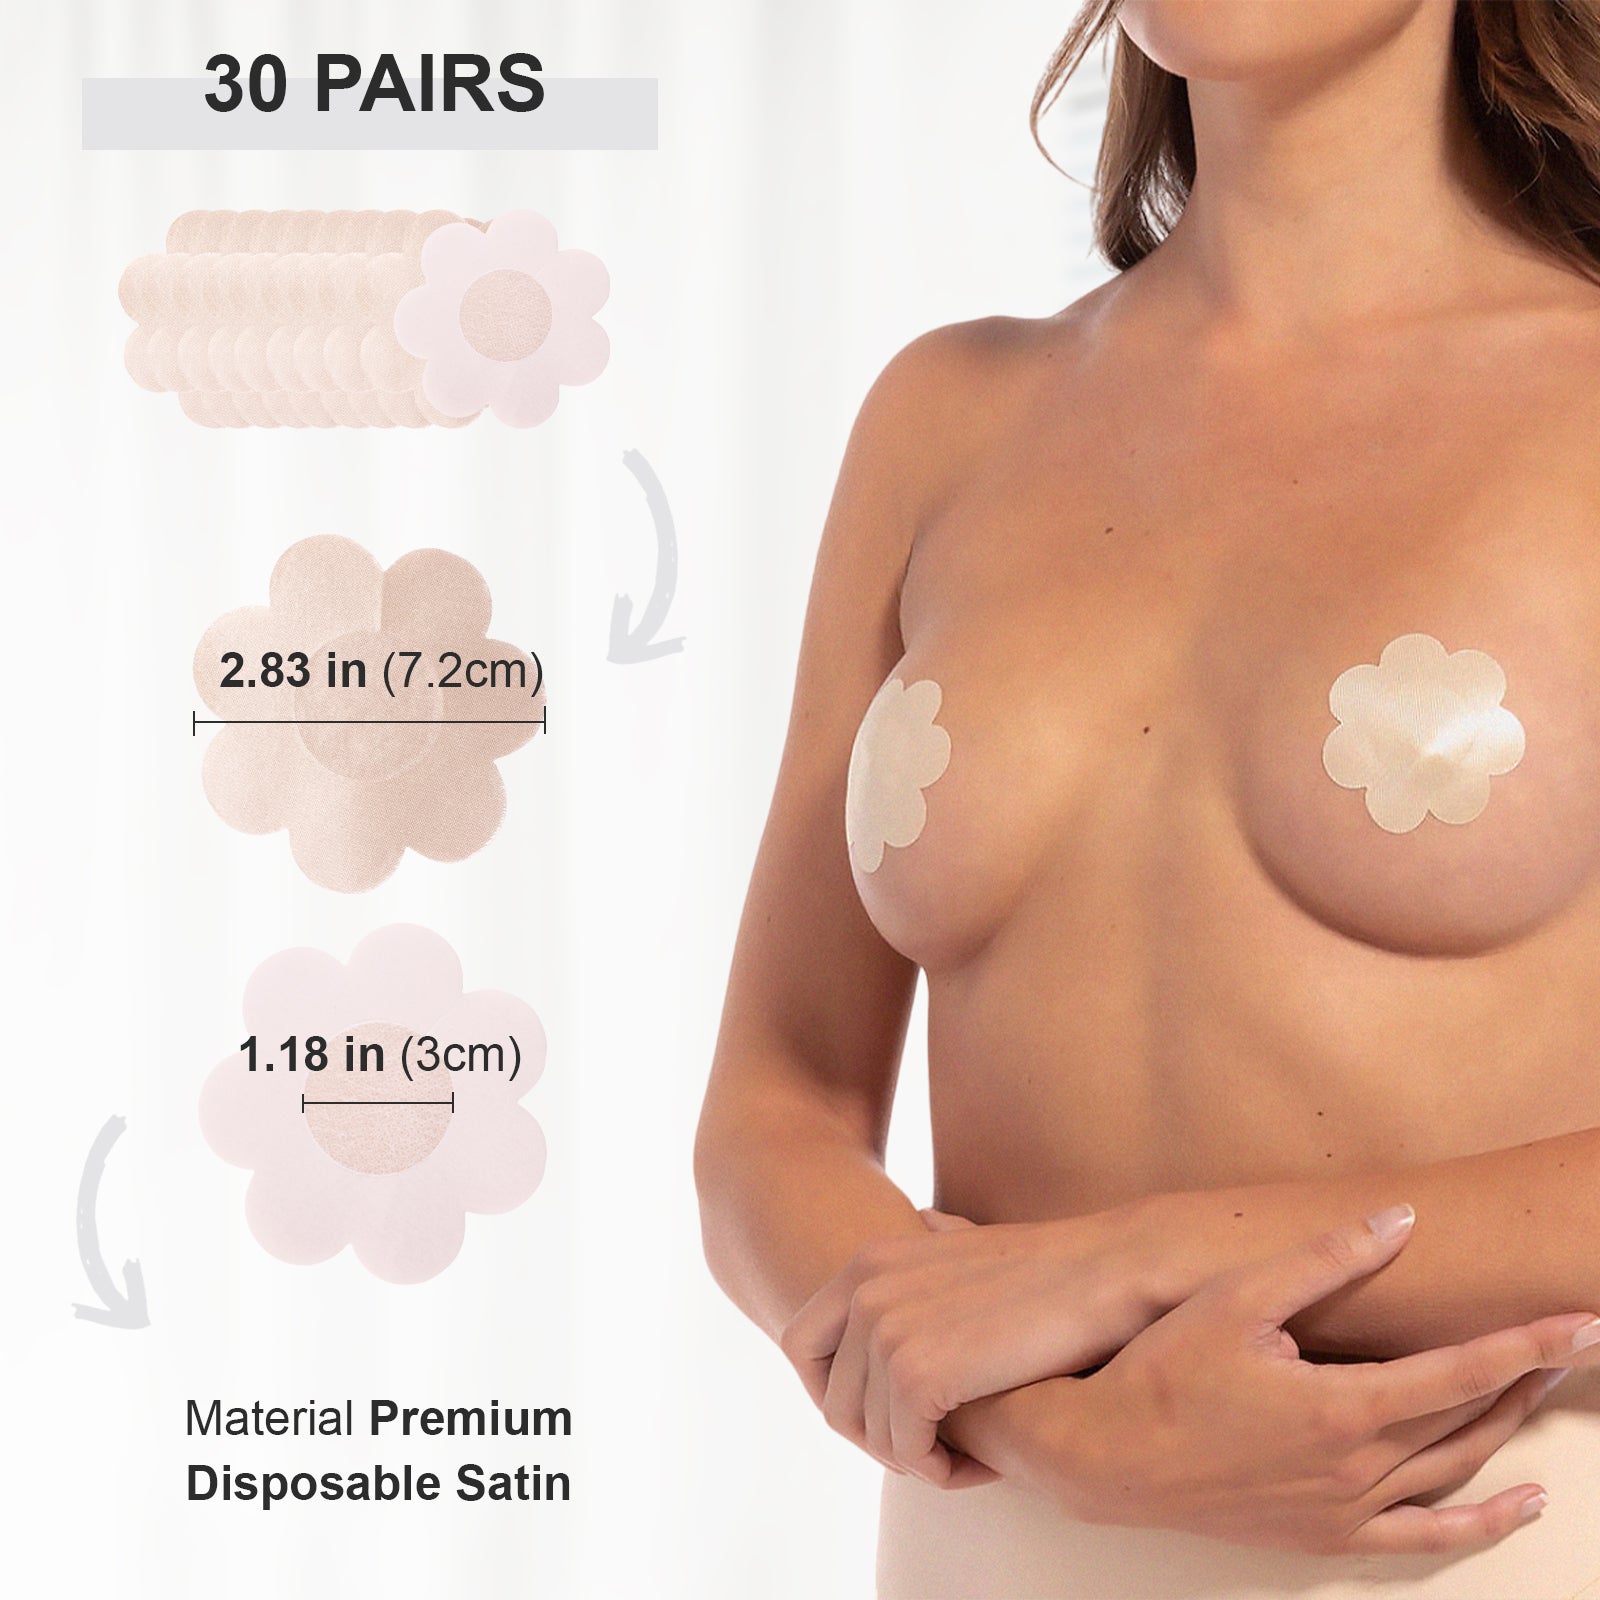 nipple covers sticky; nippies; pasties; cakes body nipple cover; nipple covers stickers; nipple pasties; nipple coverings; nipple pasties pack; petals breast pasties; niple cover for women; pasty nipple covers; nipple stickies; seamless cake cover; cake nipple covers; nip covers; nipples covers